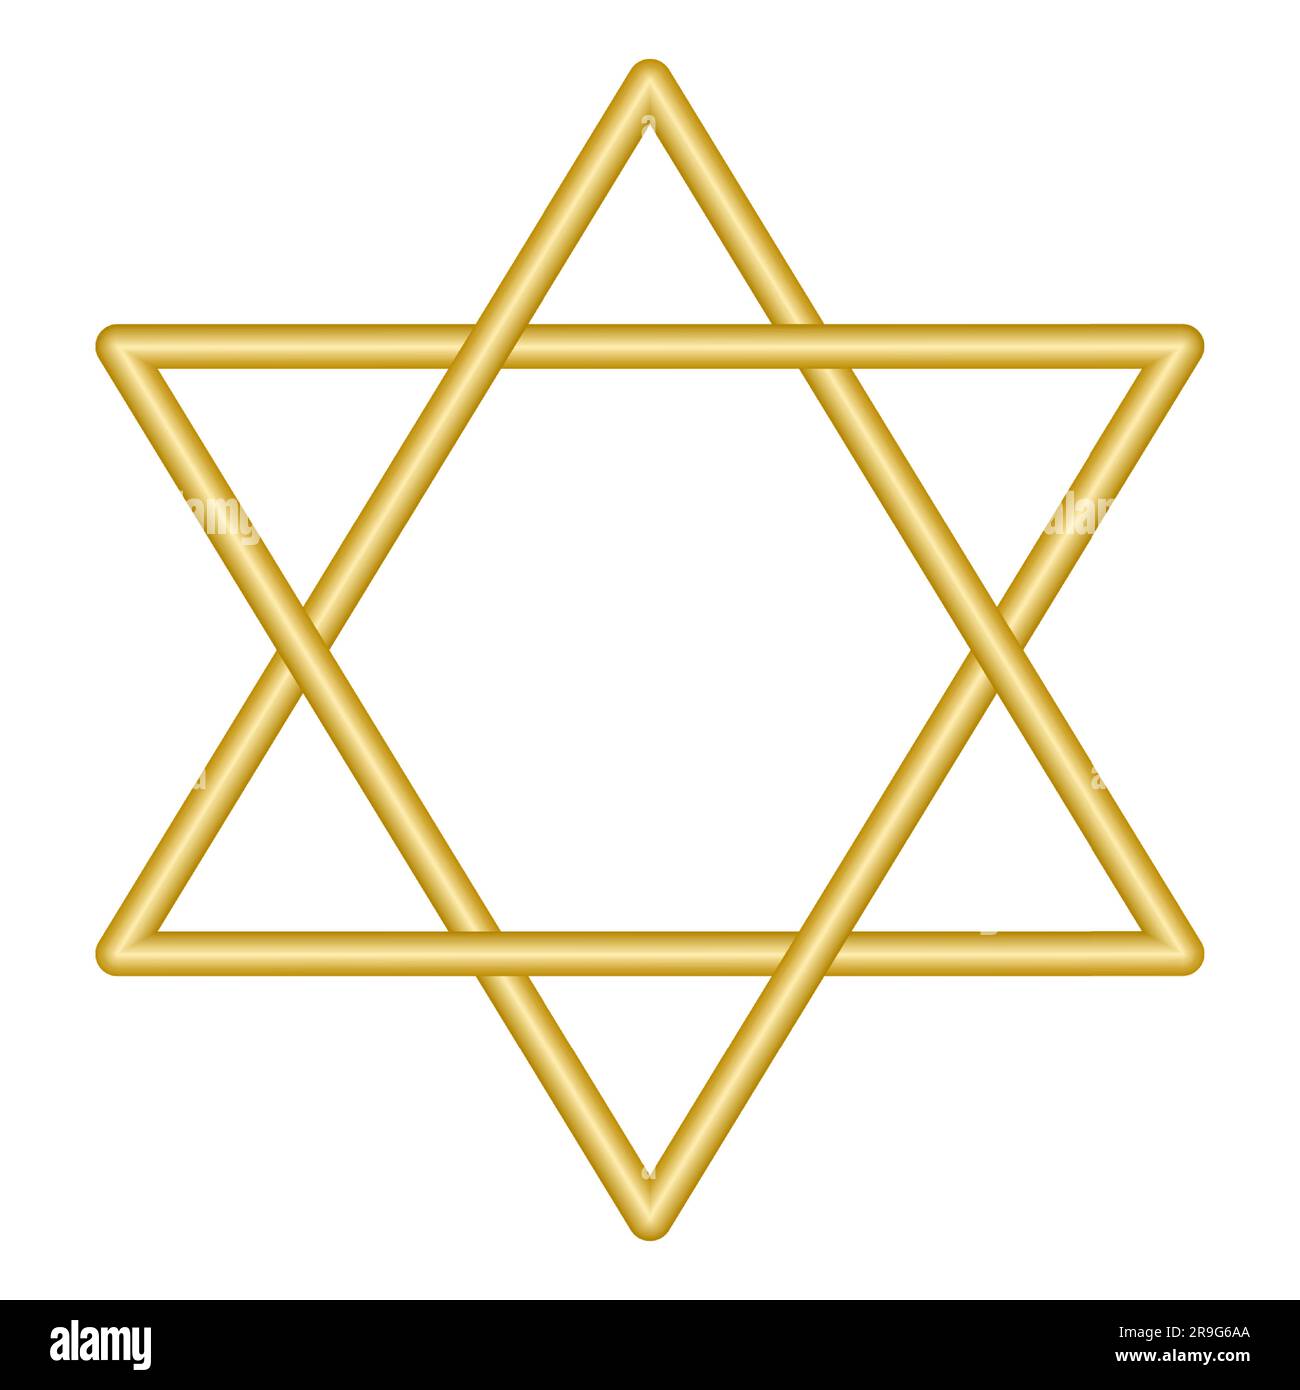 Star of David Israel symbol Gold vector illustration Isolated on white background Stock Vector